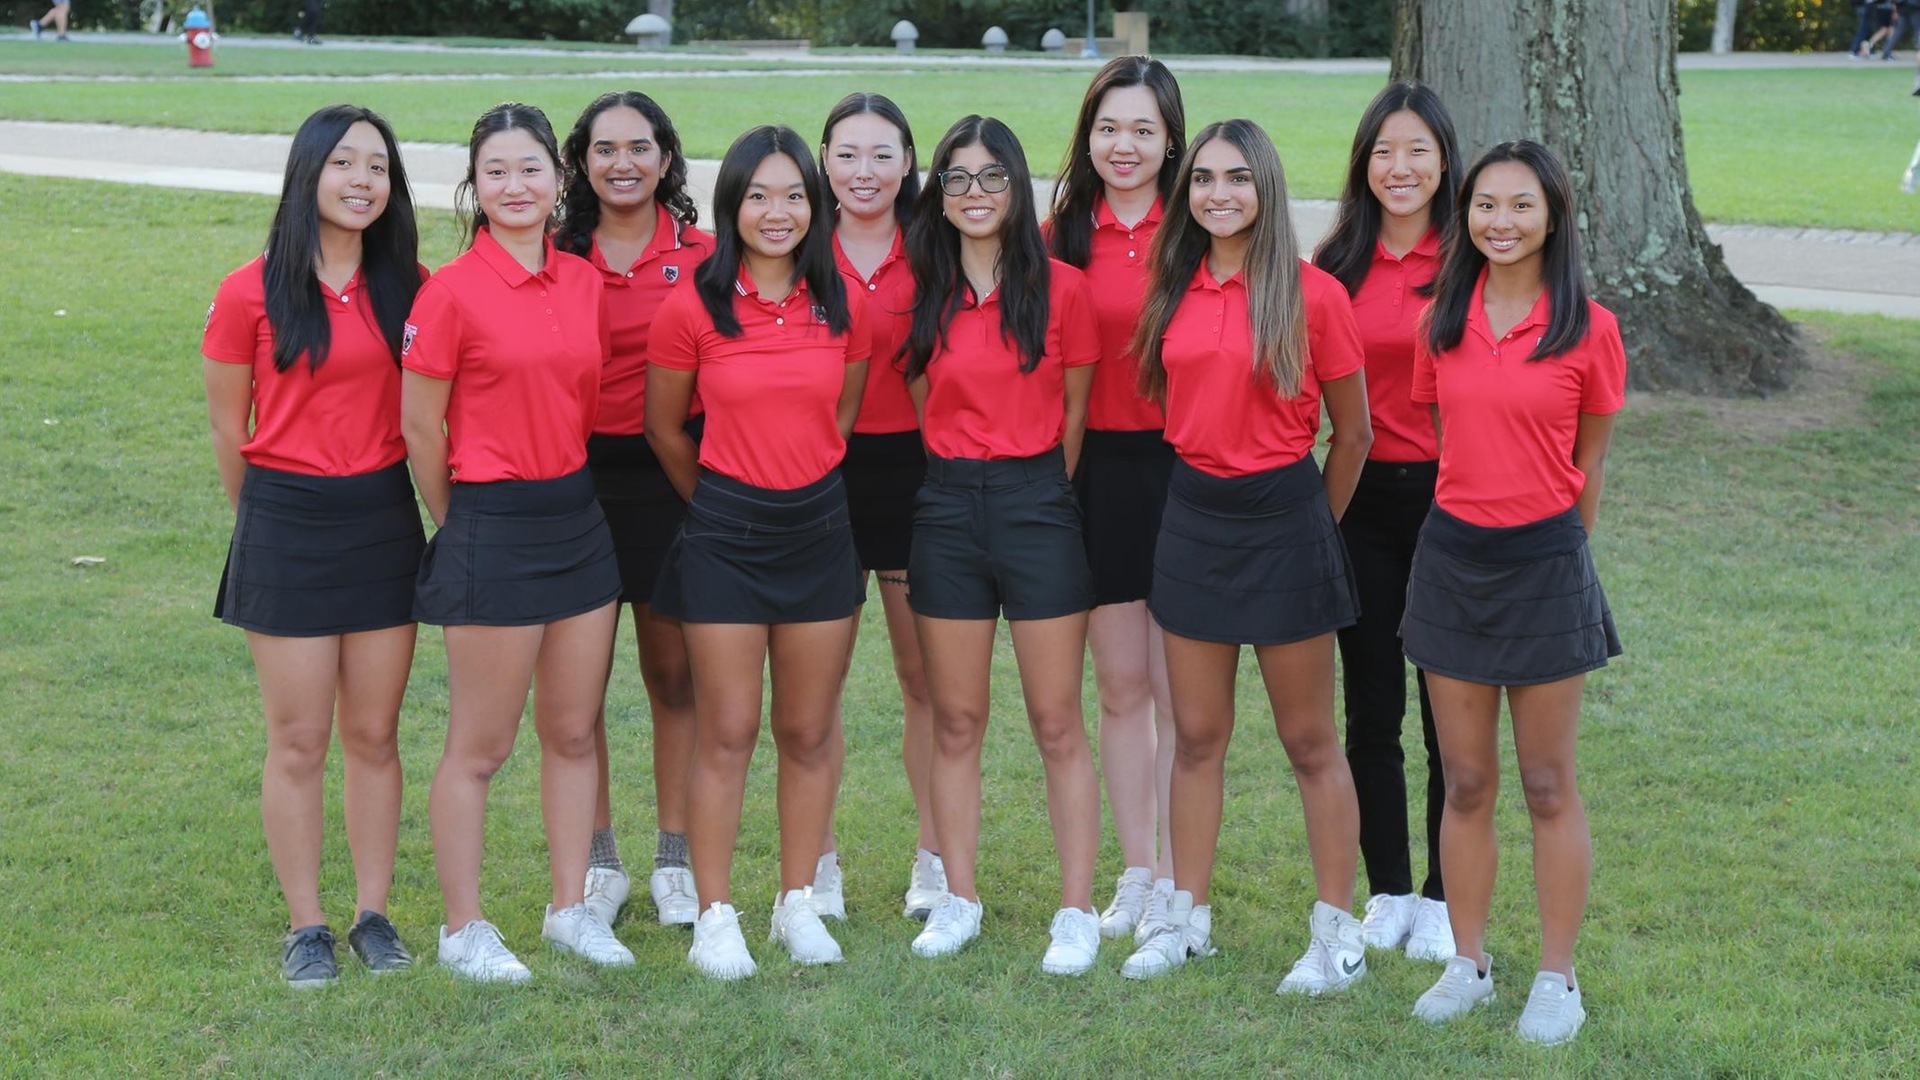 women's golf team photo with players wearing red shirts and black bottoms standing in two rows